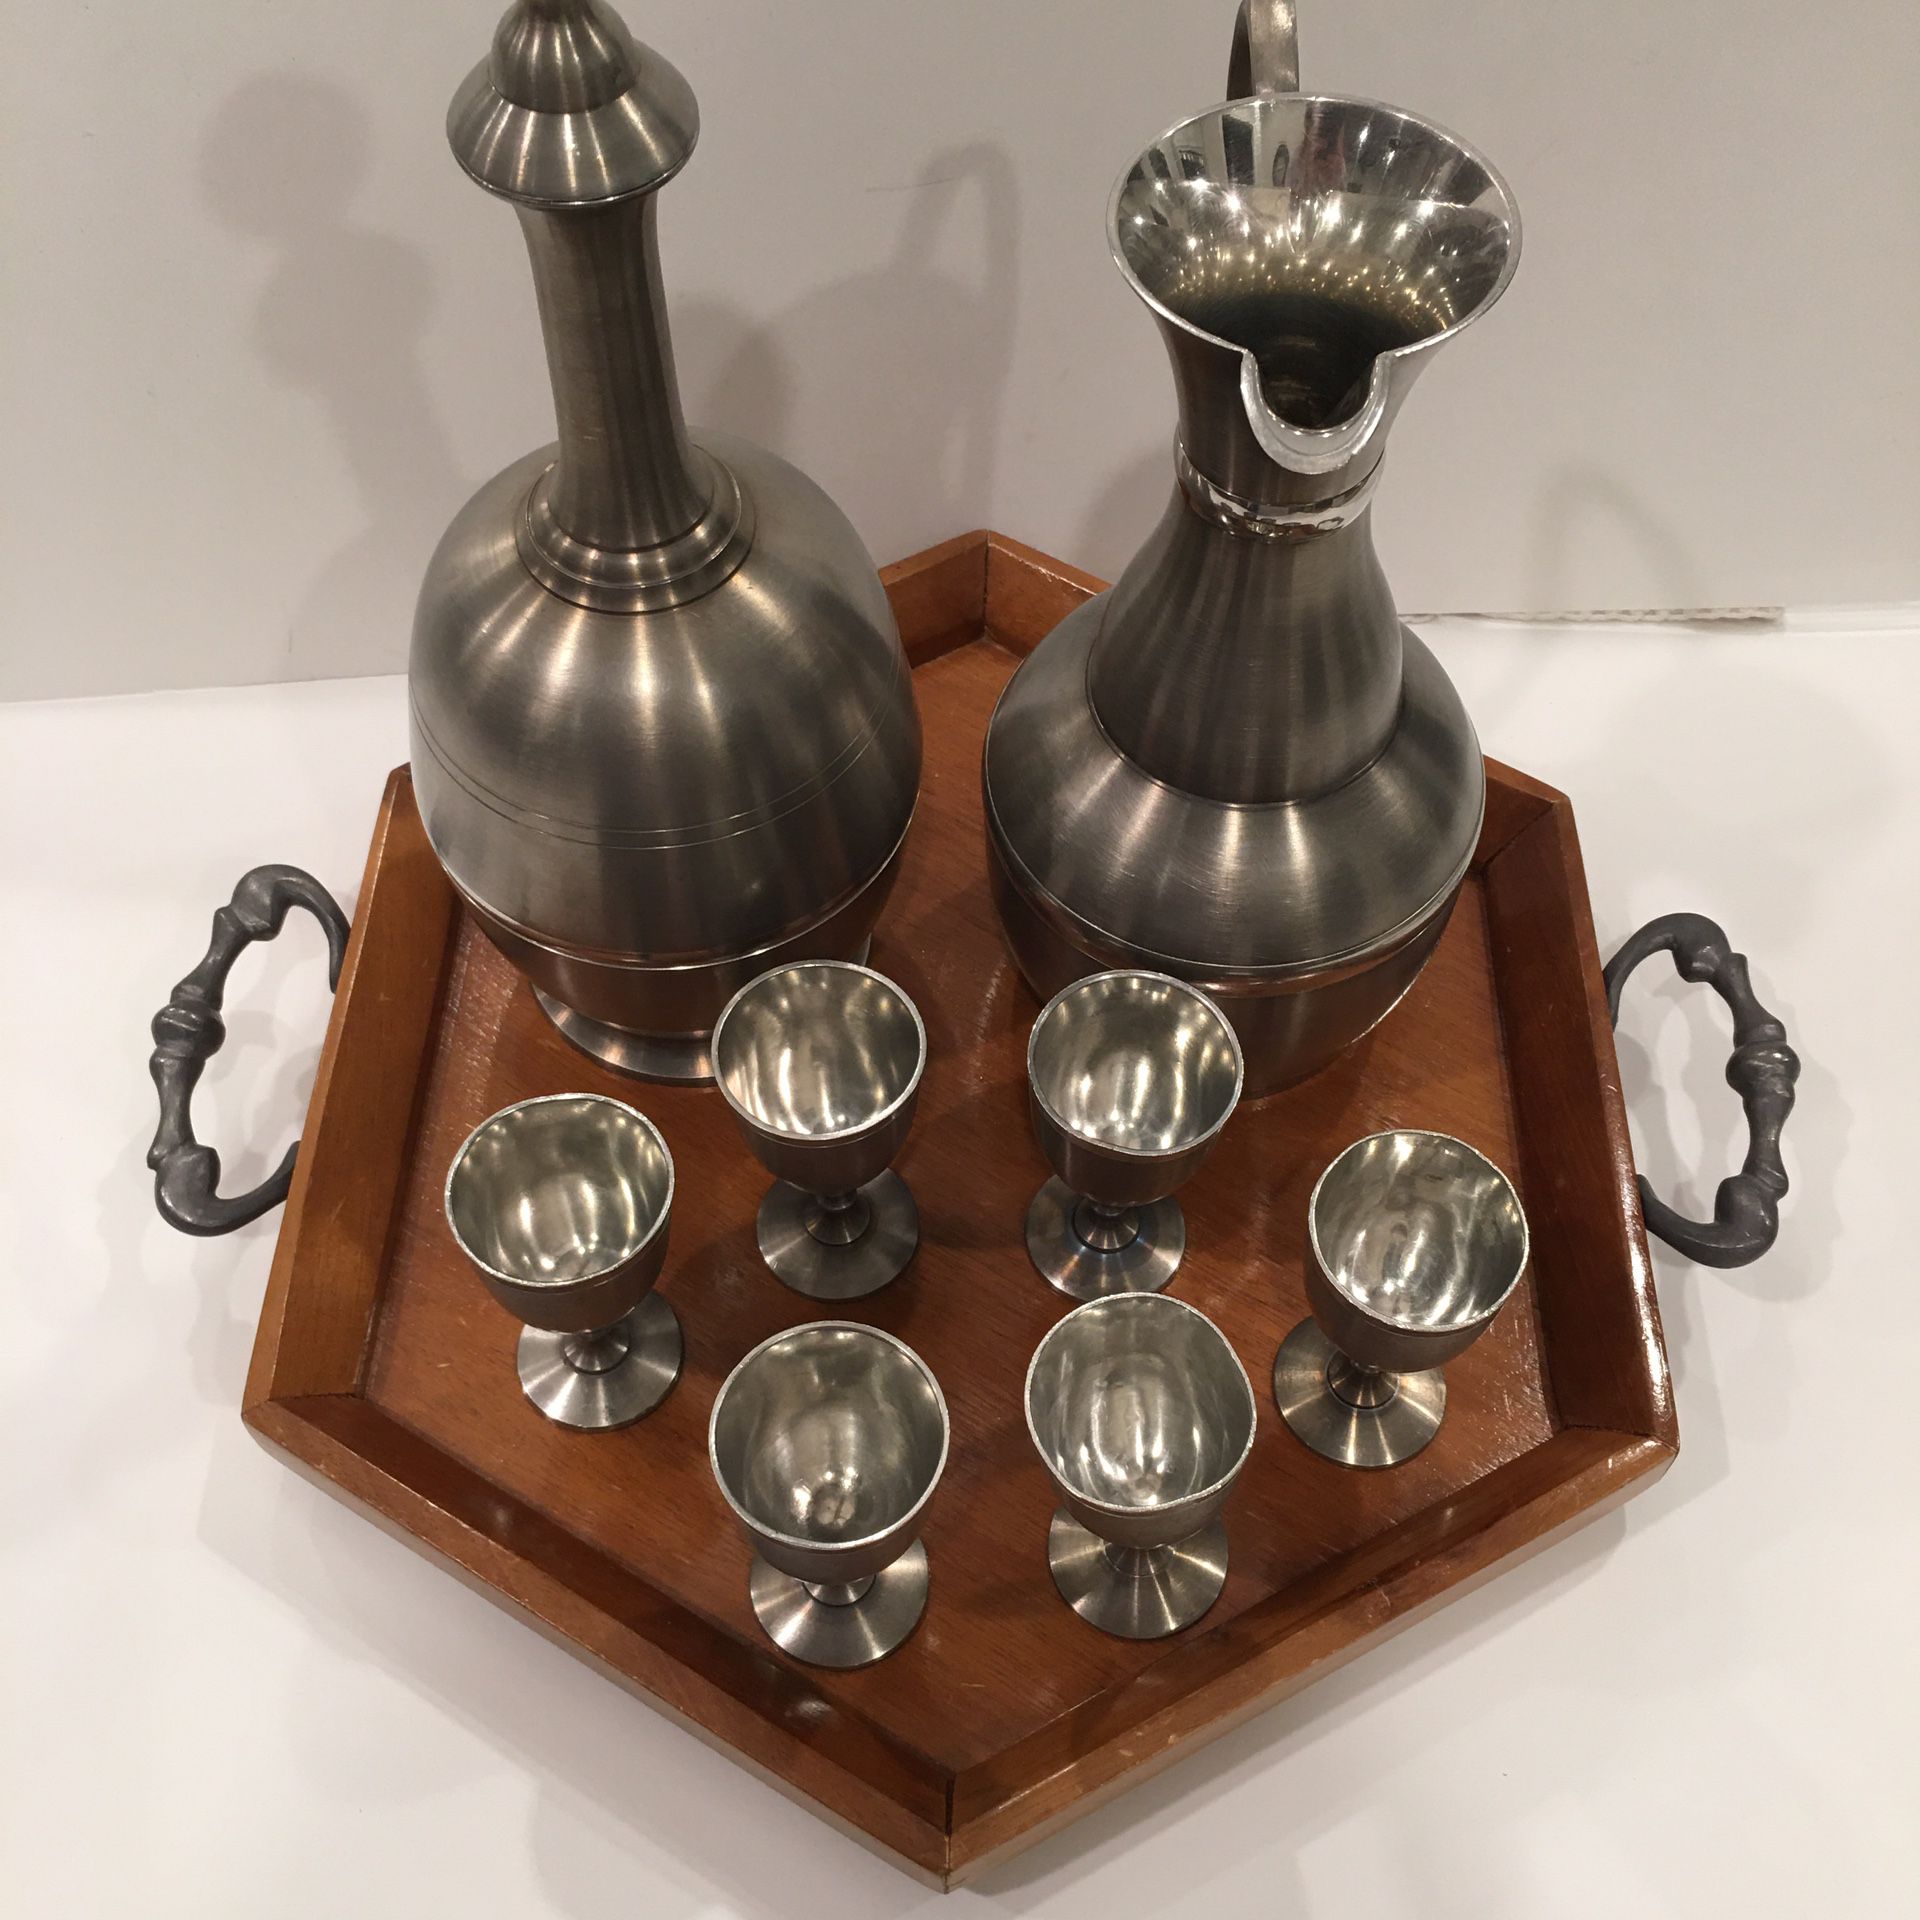 Vintage pewter set with tray